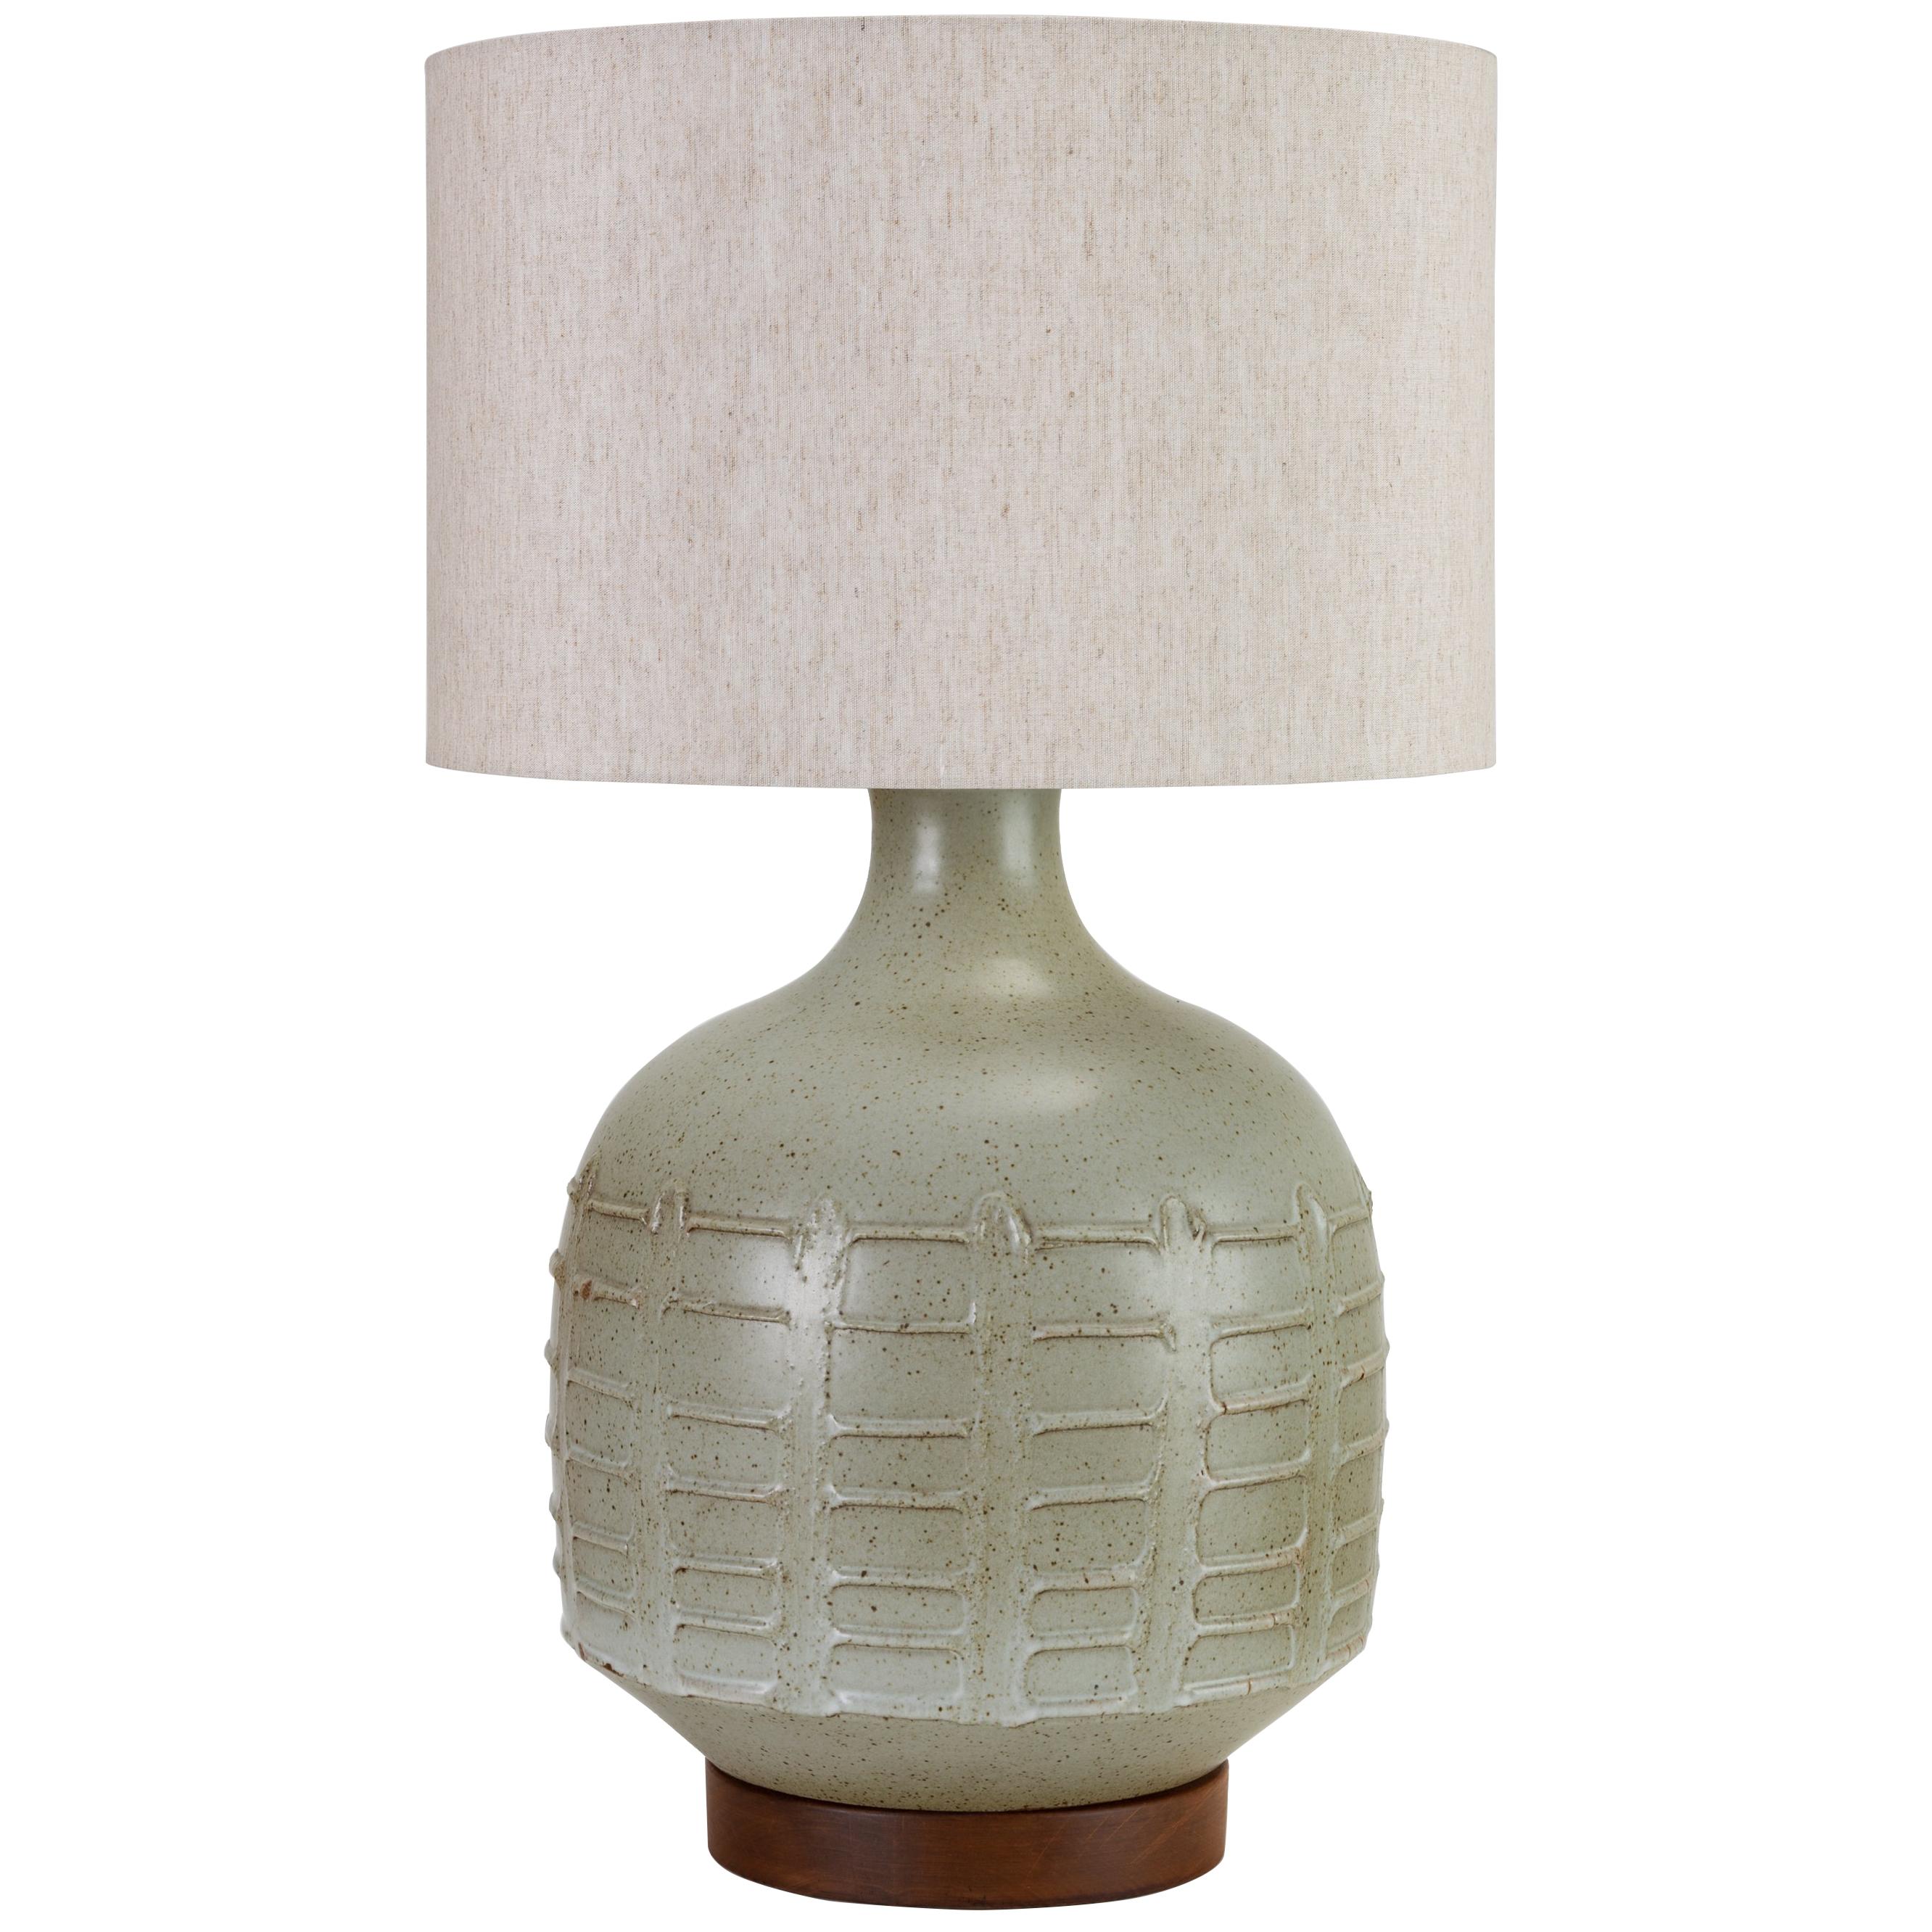 David Cressey Pro Artisan Table Lamp for Architectural Pottery